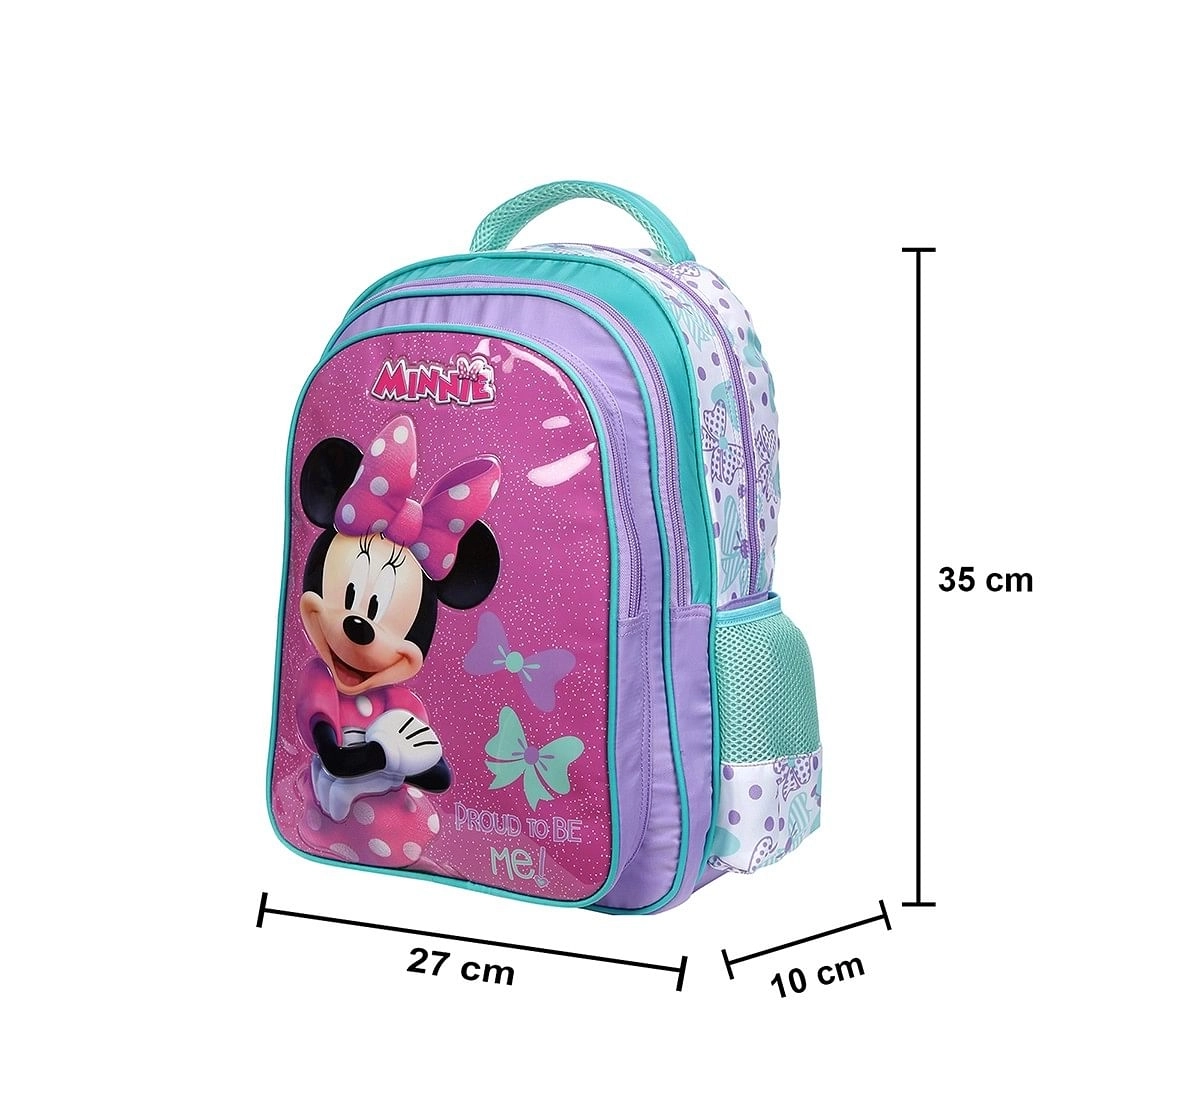 Disney Minnie Imaginative 14 Backpack Bags for age 3Y+ 